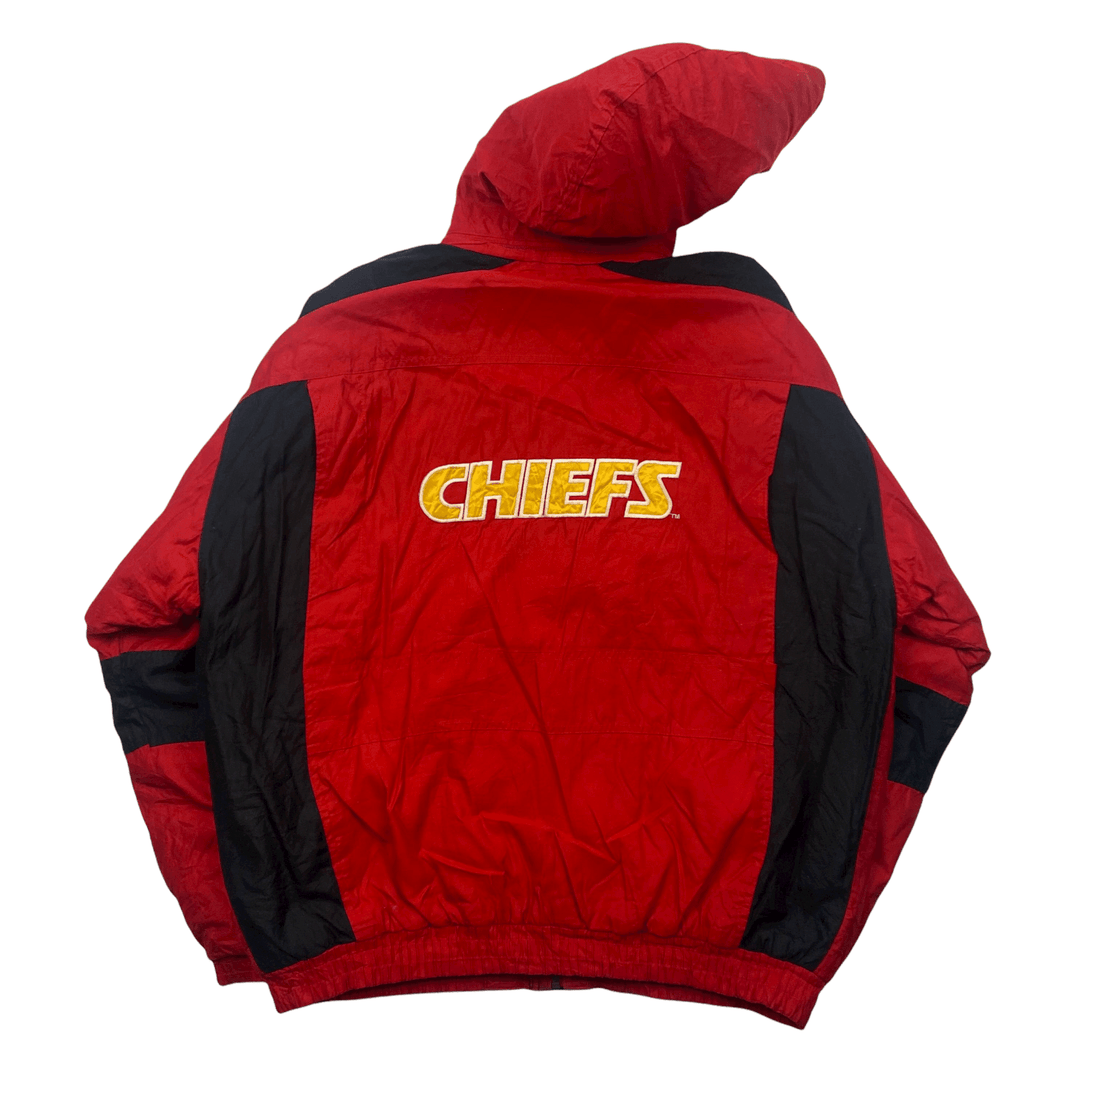 Vintage Red + Black Reebok NFL Pro Line Kansas City Chiefs Large Logo Spell-Out Jacket - Extra Large - The Streetwear Studio